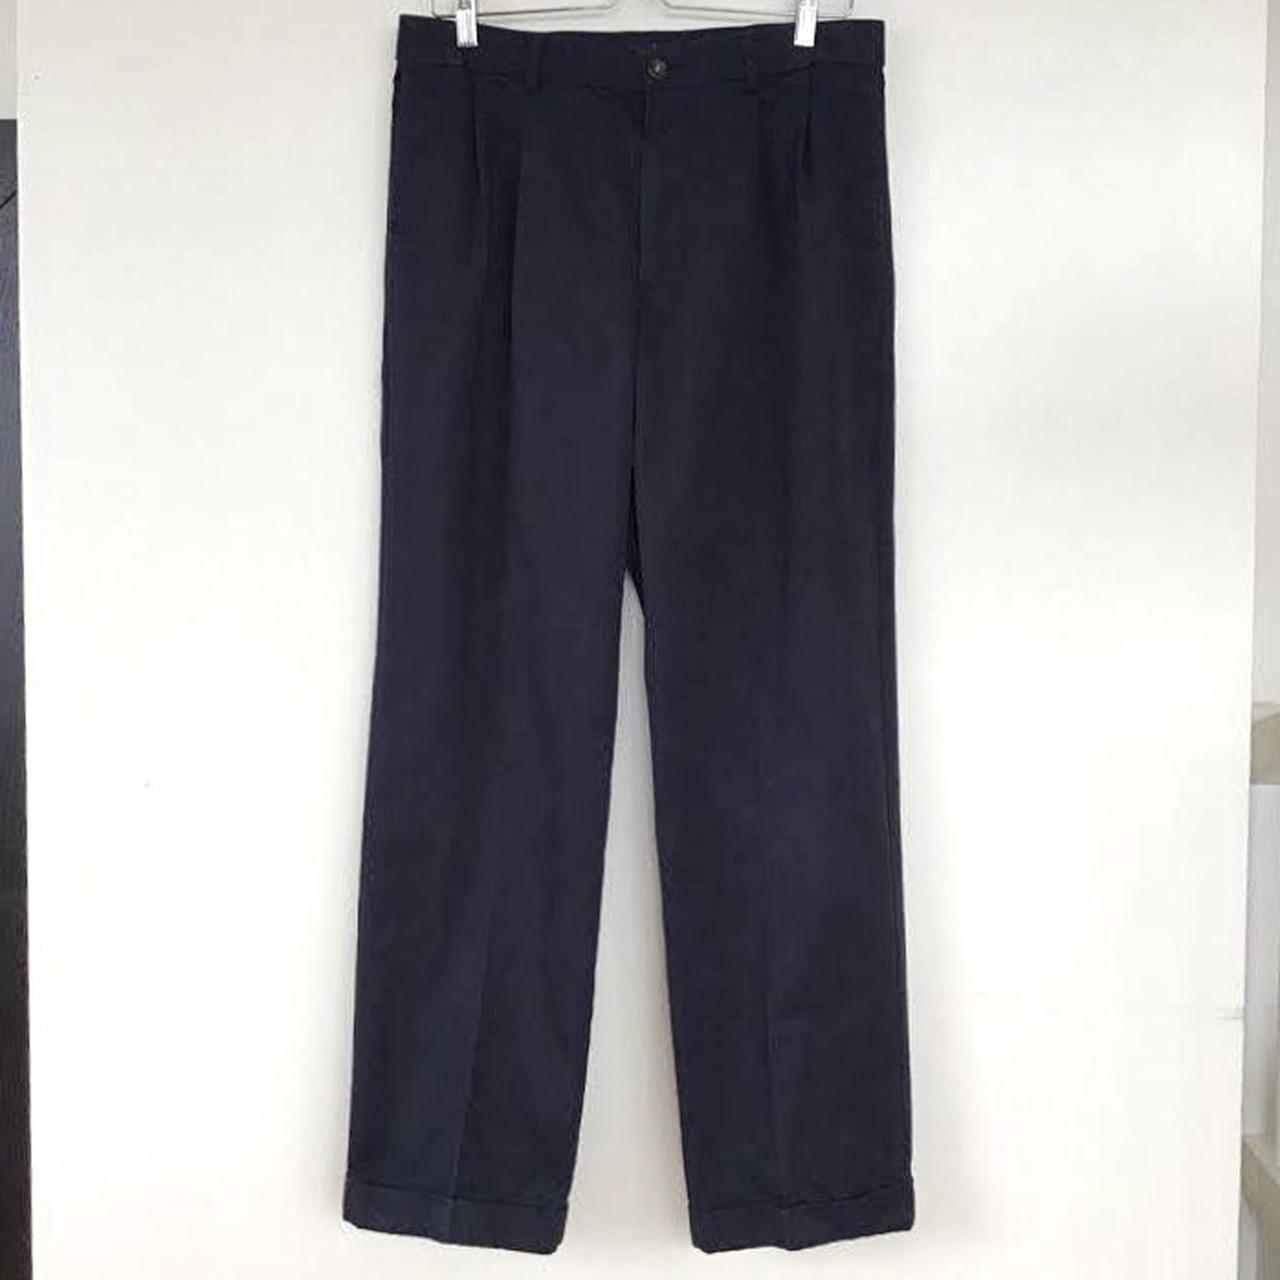 Dockers Men's Navy and Blue Trousers